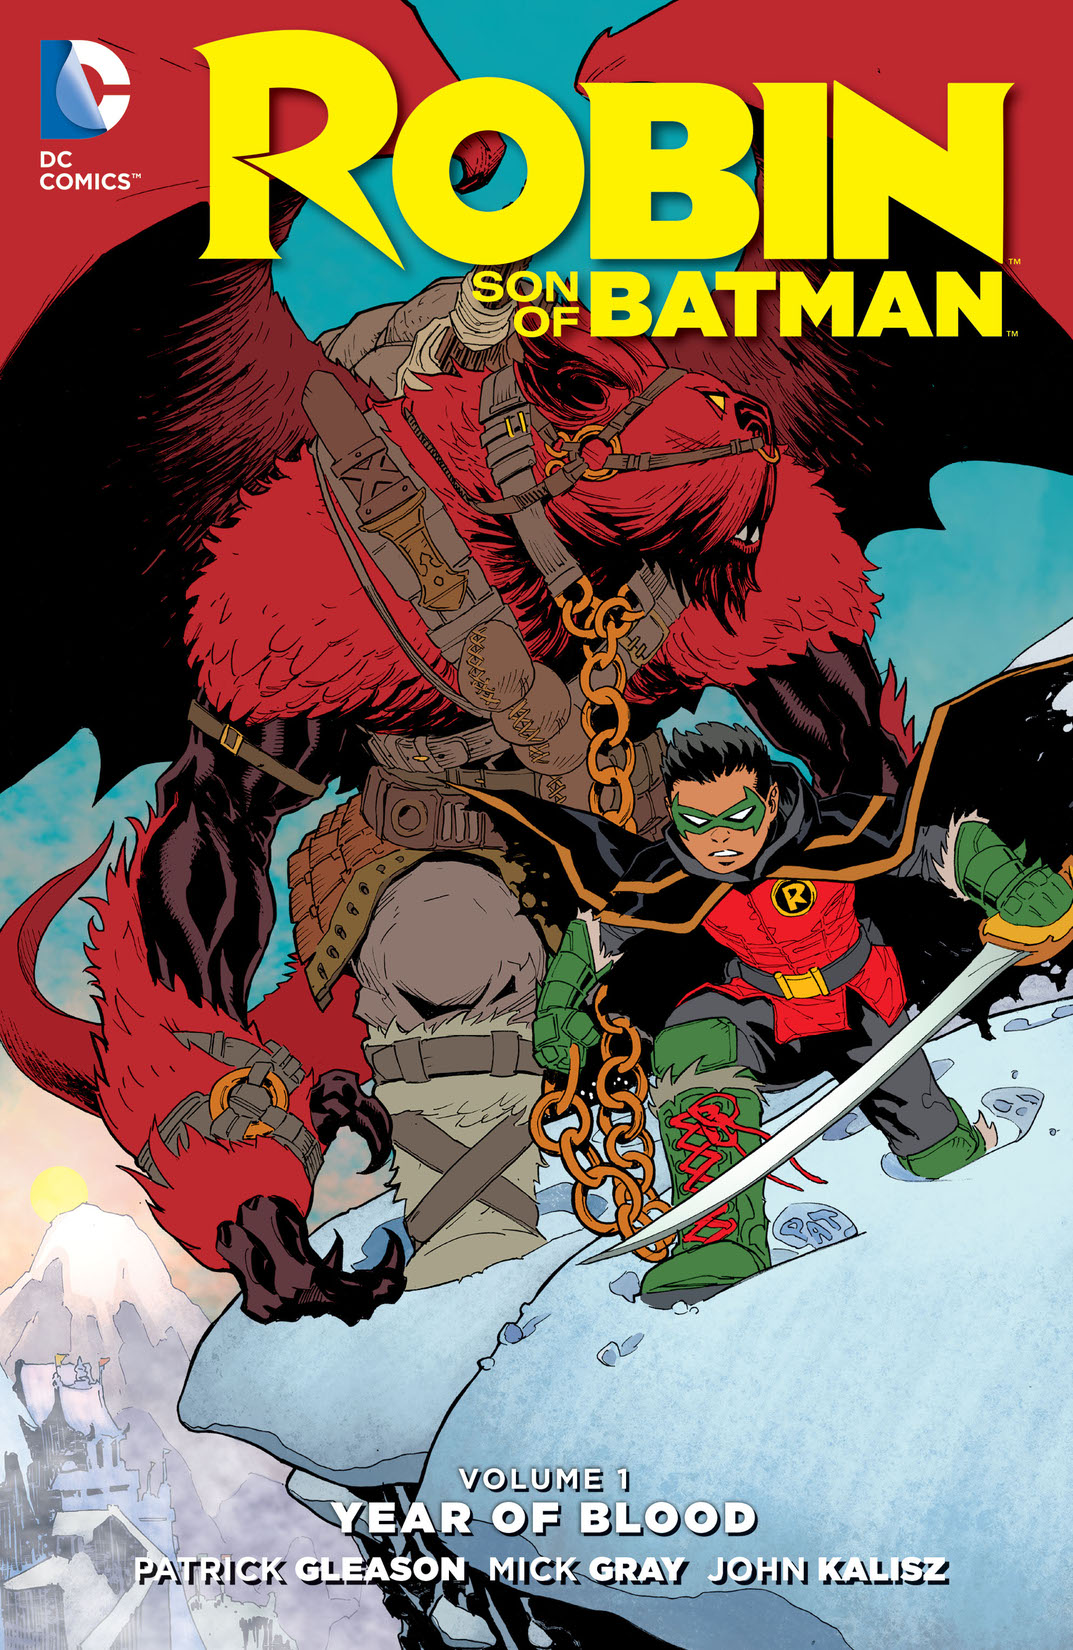 Robin: Son of Batman Vol. 1: Year of Blood preview images